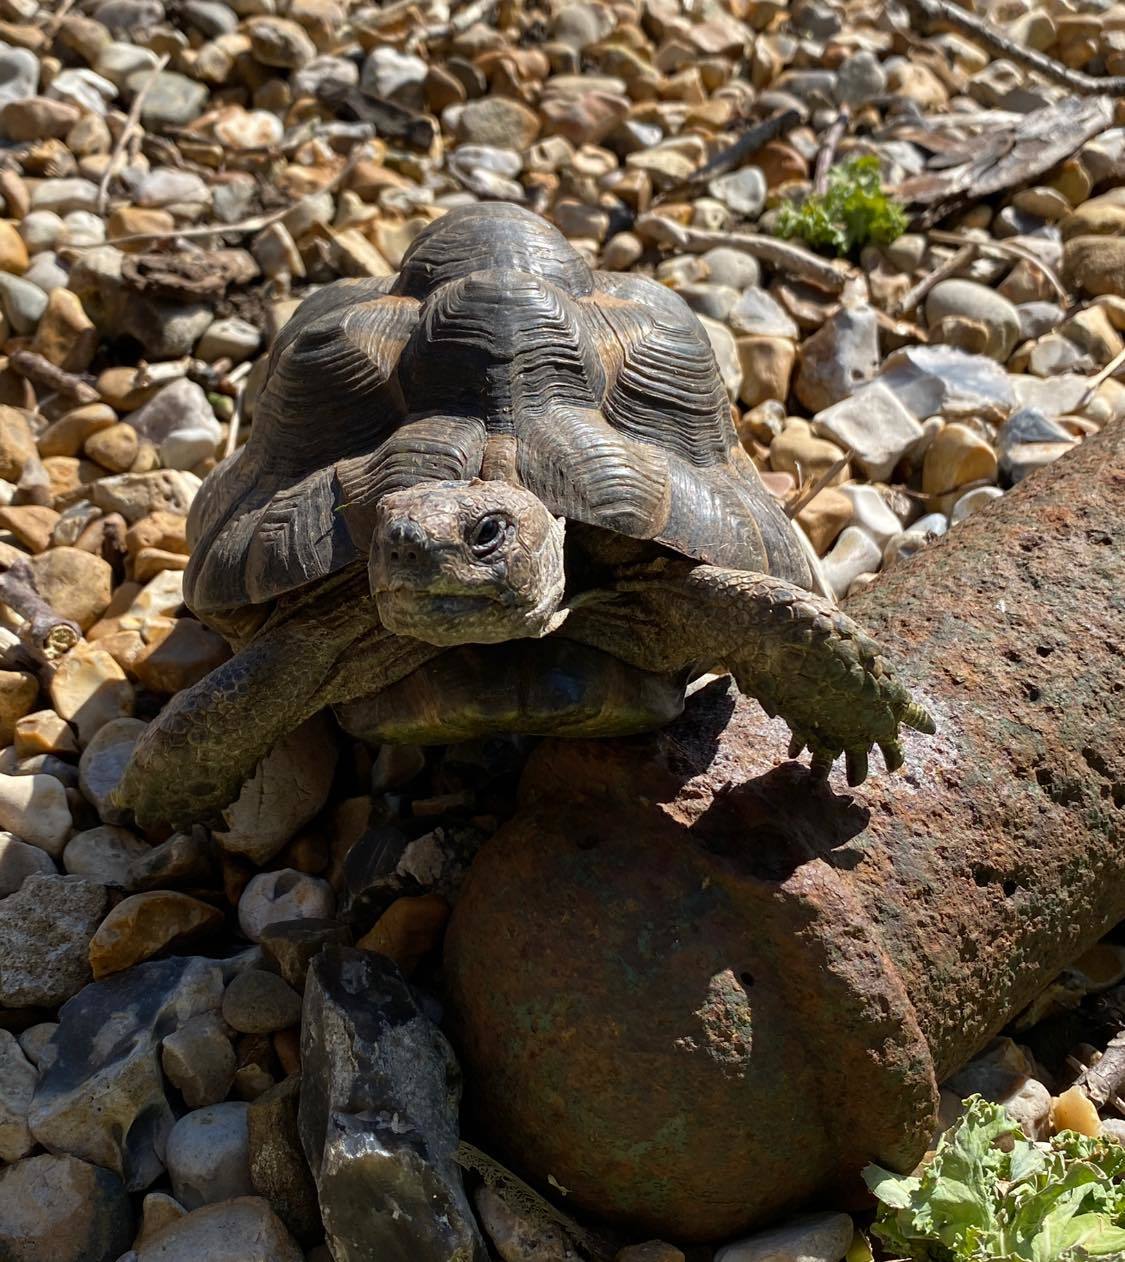 Another shot by Samantha Thomas, this time a tortoise on the pebbles